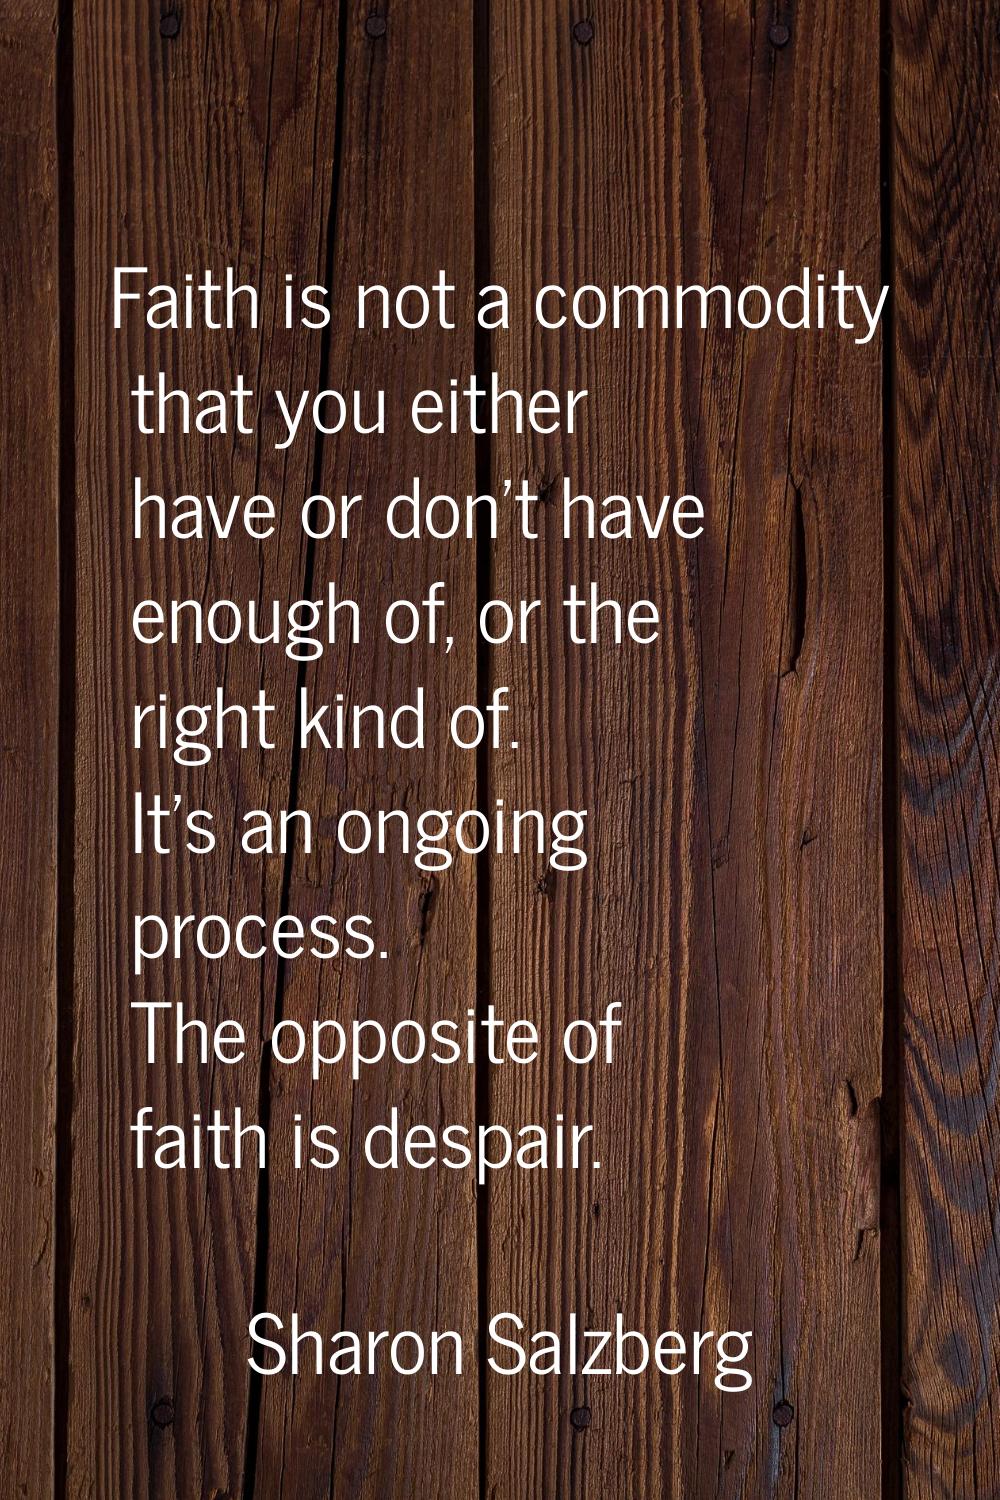 Faith is not a commodity that you either have or don't have enough of, or the right kind of. It's a